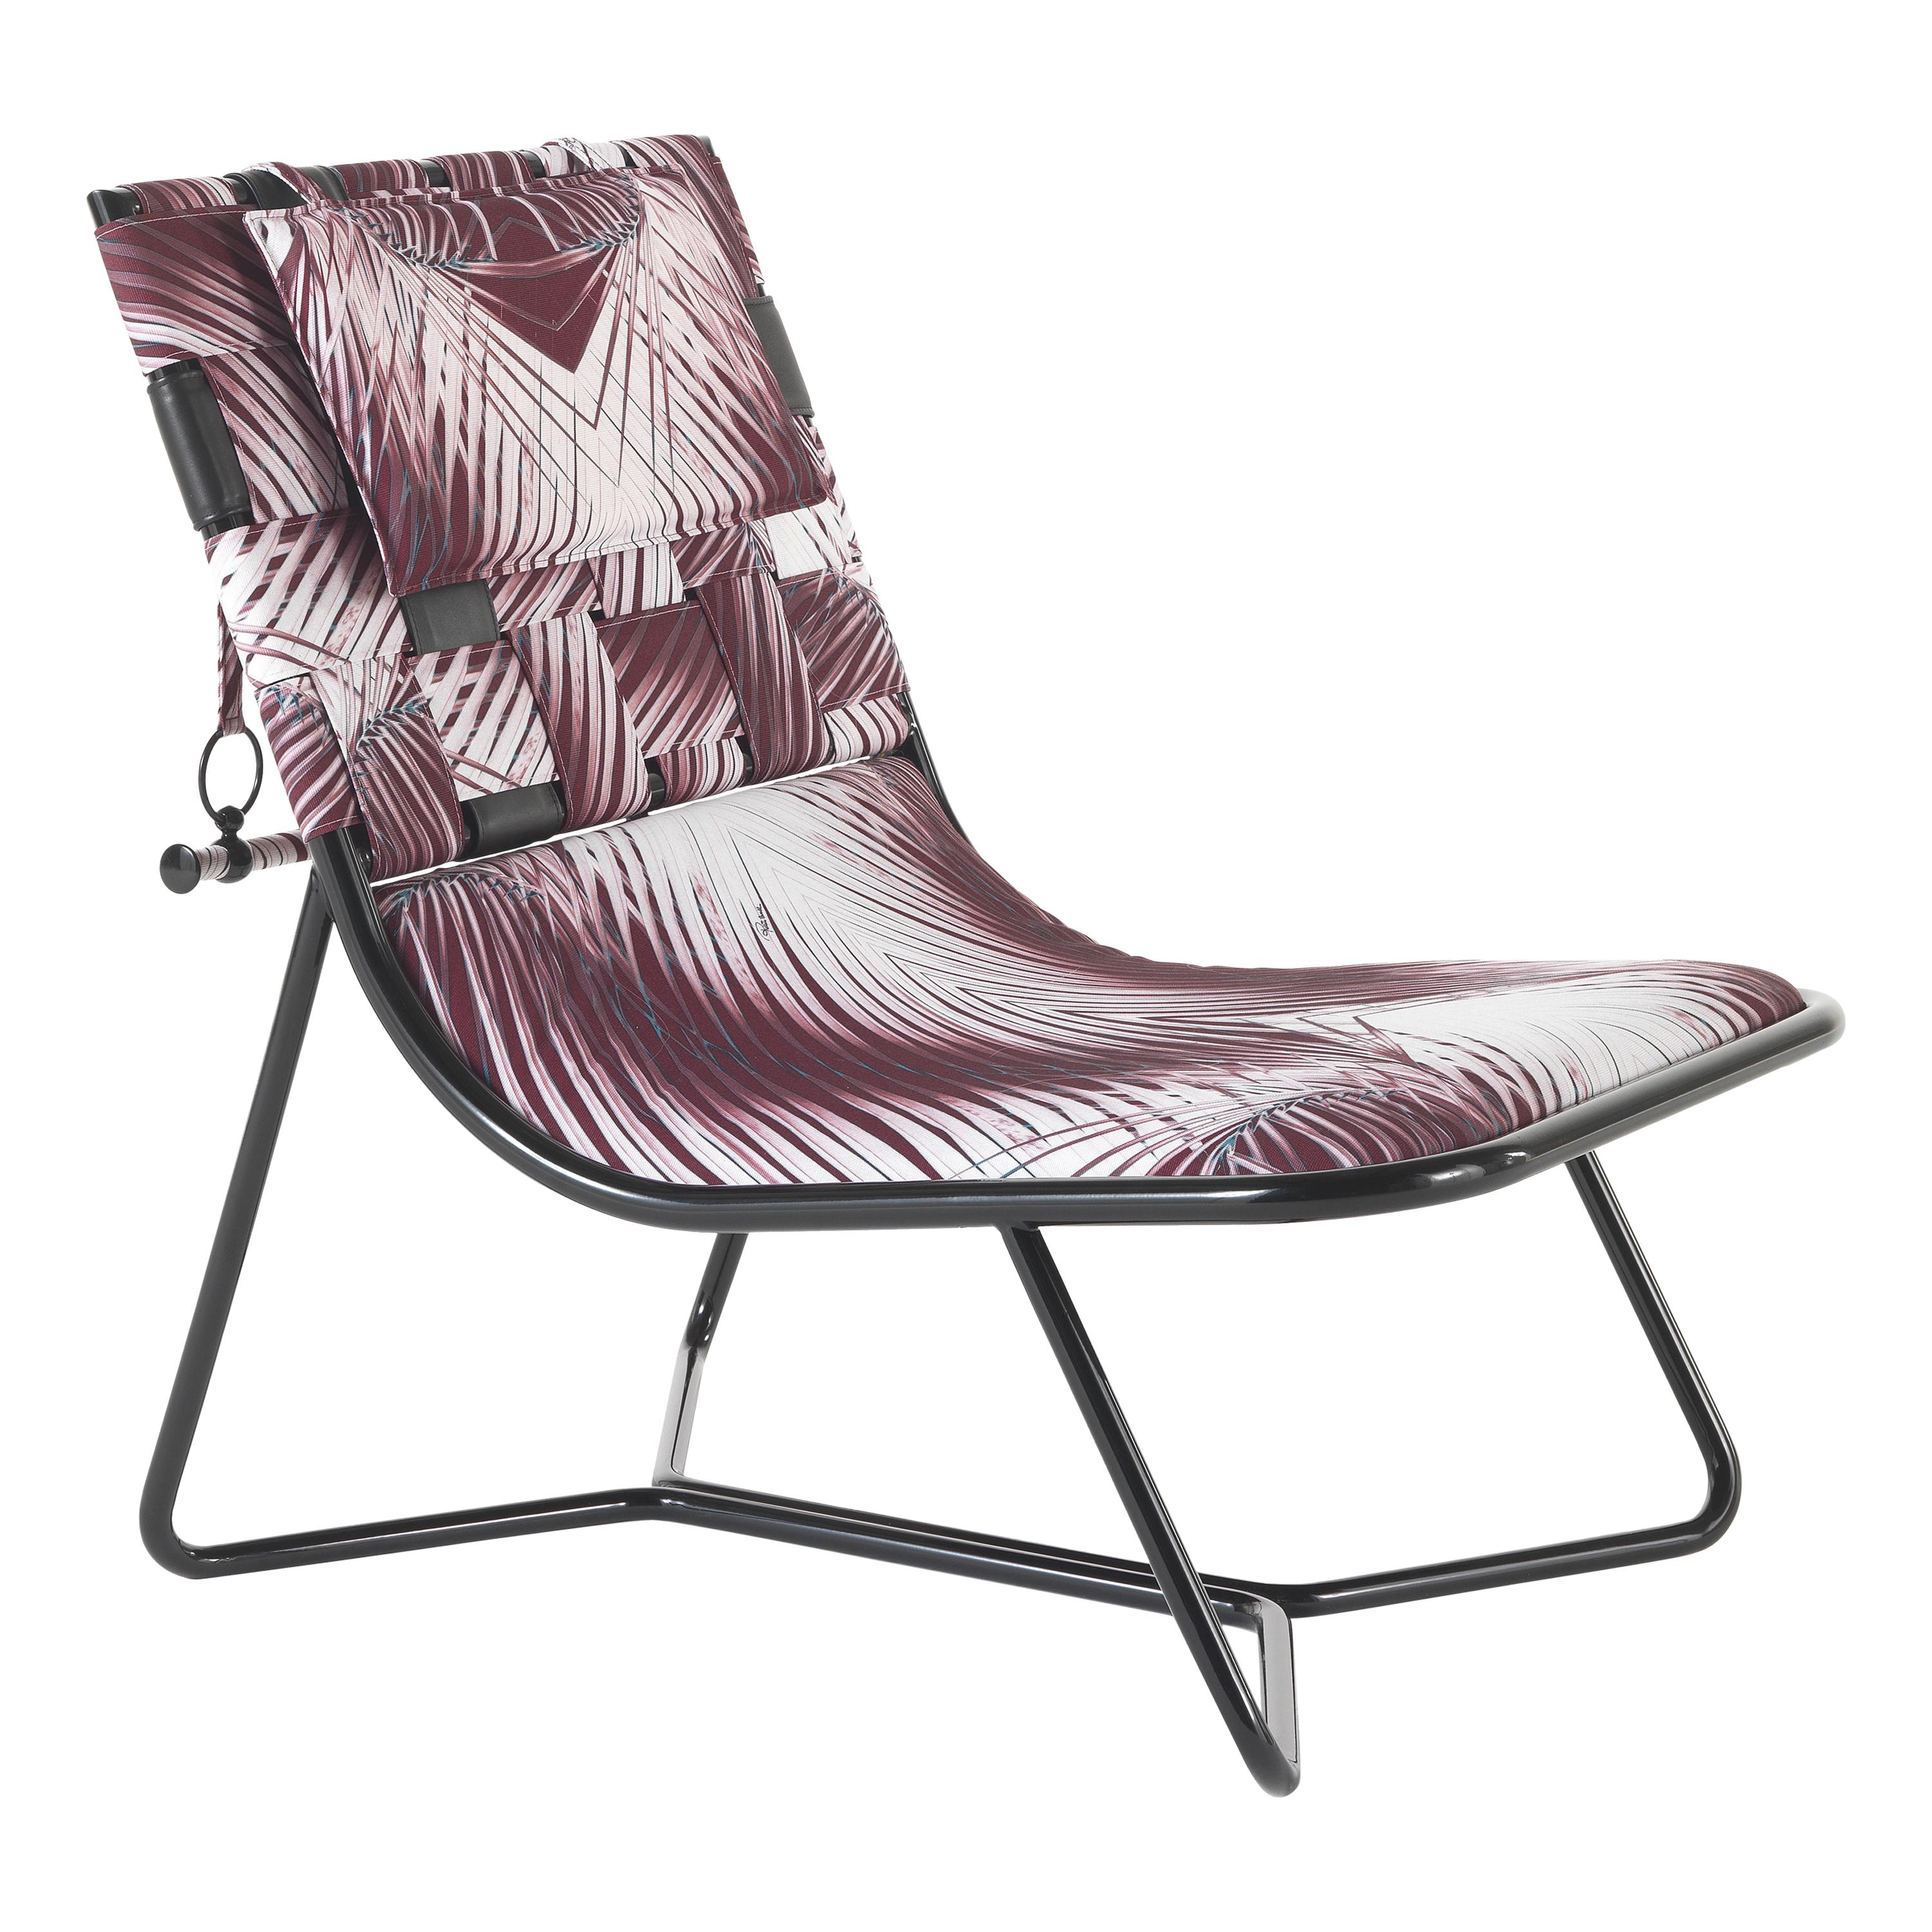 Papeete Outdoor armchair in metal frame in outdoor finishing col. Black. Outdoor fabric cat. A. Jungle and black leather. Structure in outdoor. Additional decorative cushions upon request.